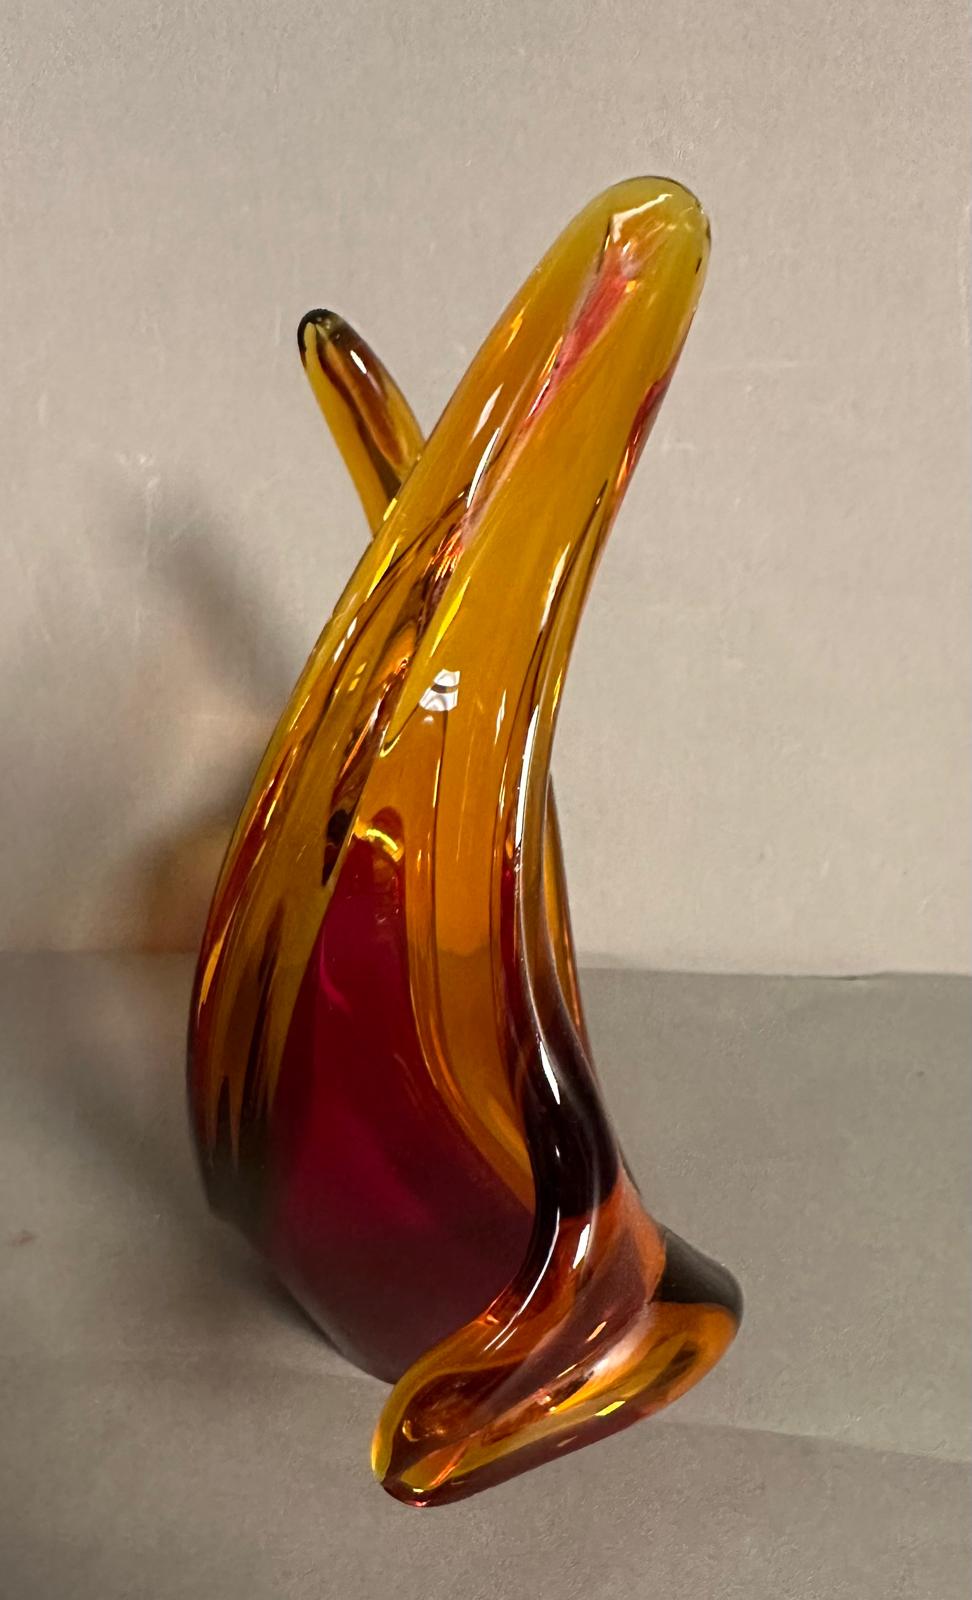 Two contemporary art glass vases in cranberry and yellow - Image 2 of 4